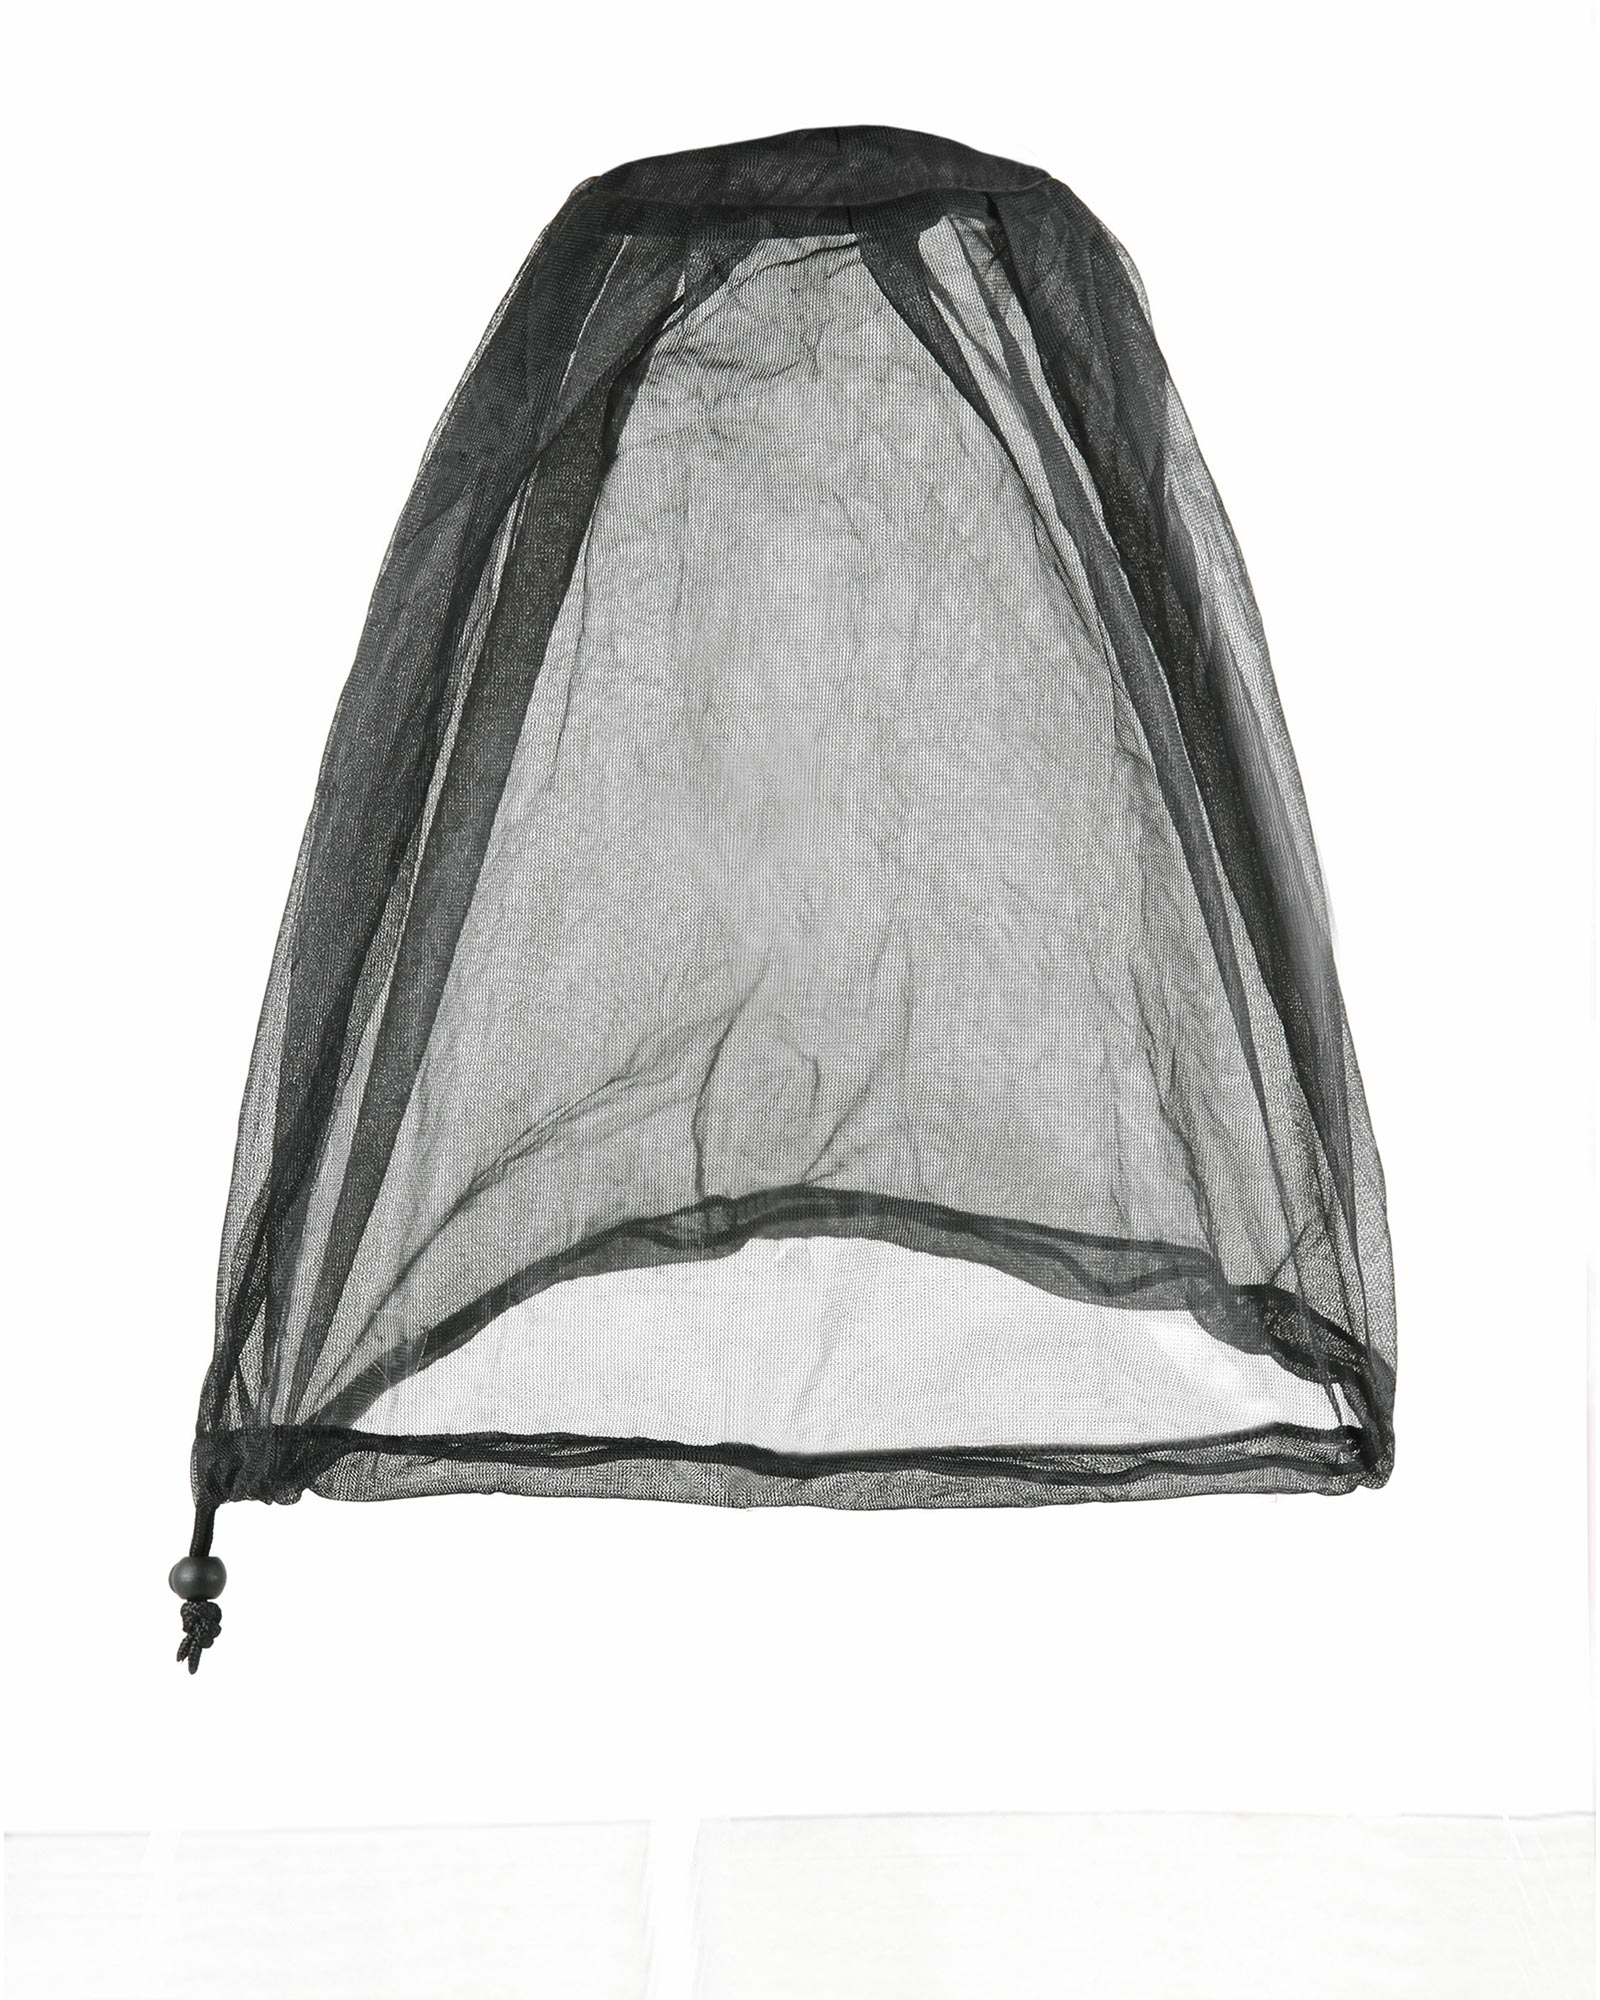 Product image of Lifesystems Mosquito Head Net